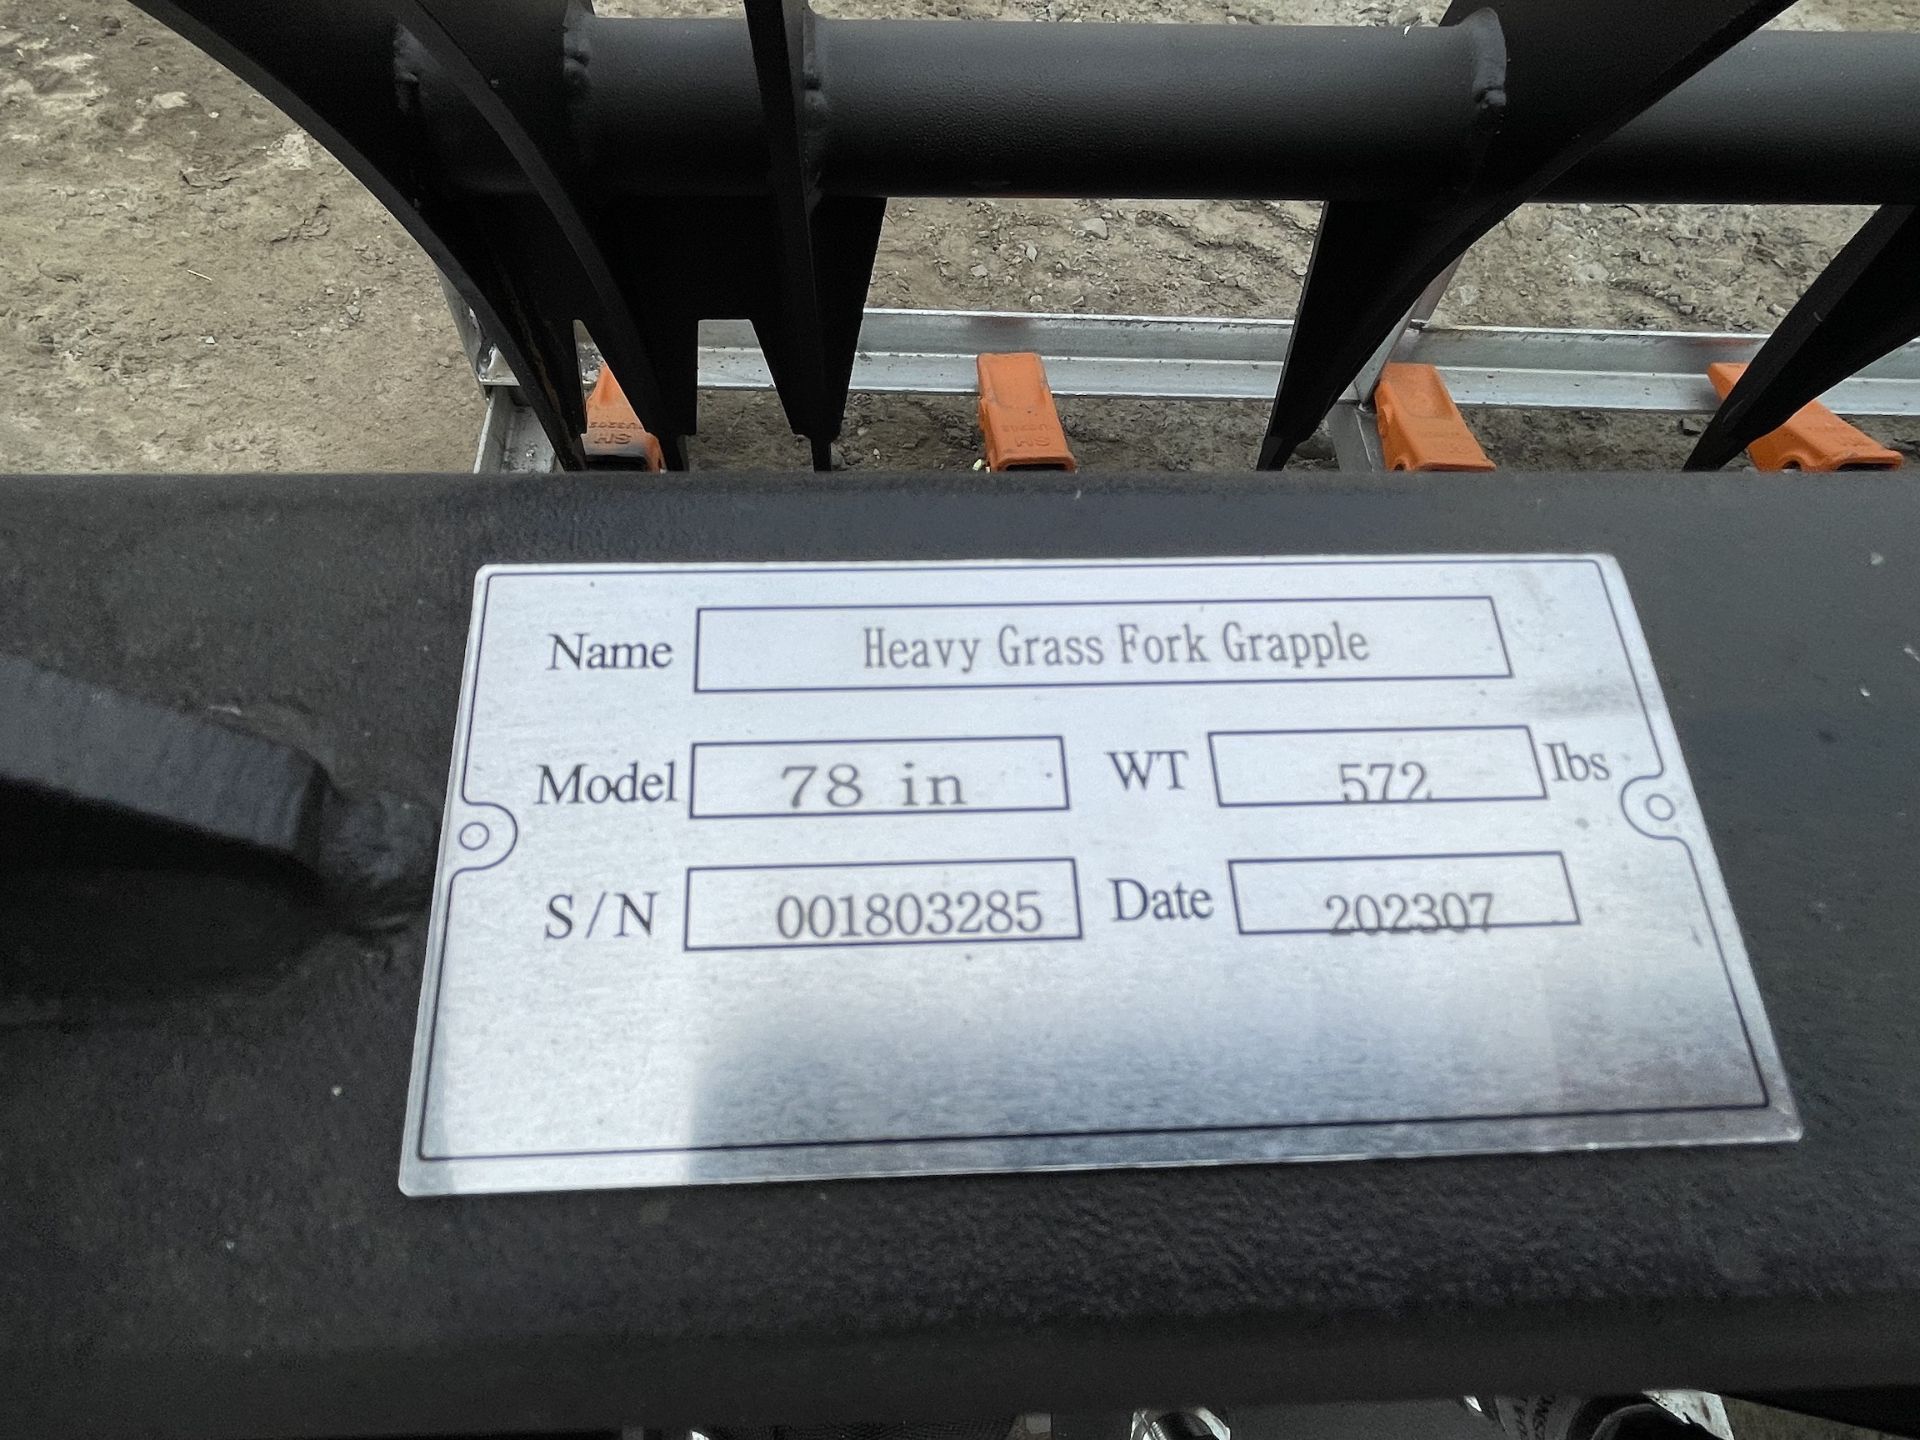 Brand New Greatbear Heavy Grass Fork Grapple Skid Steer Attachment (NY155) - Image 9 of 10